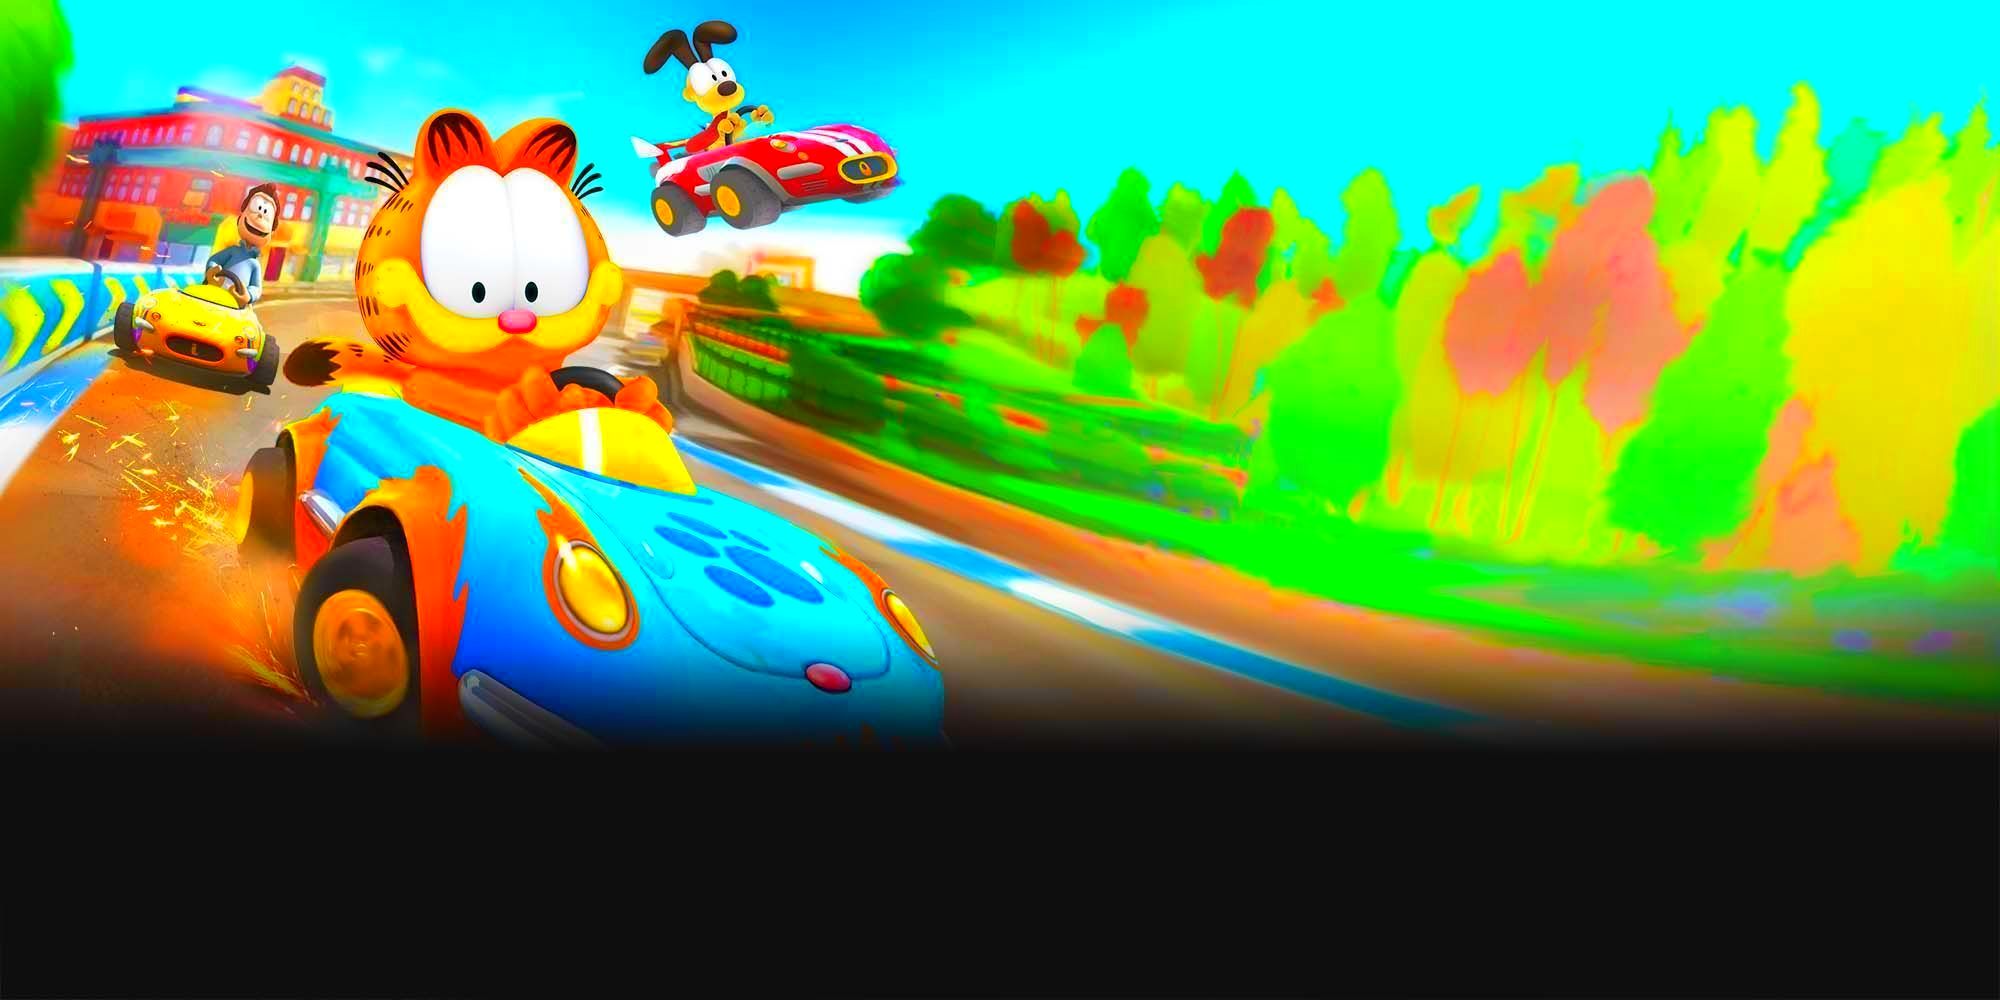 garfield kart deluxe game for pc